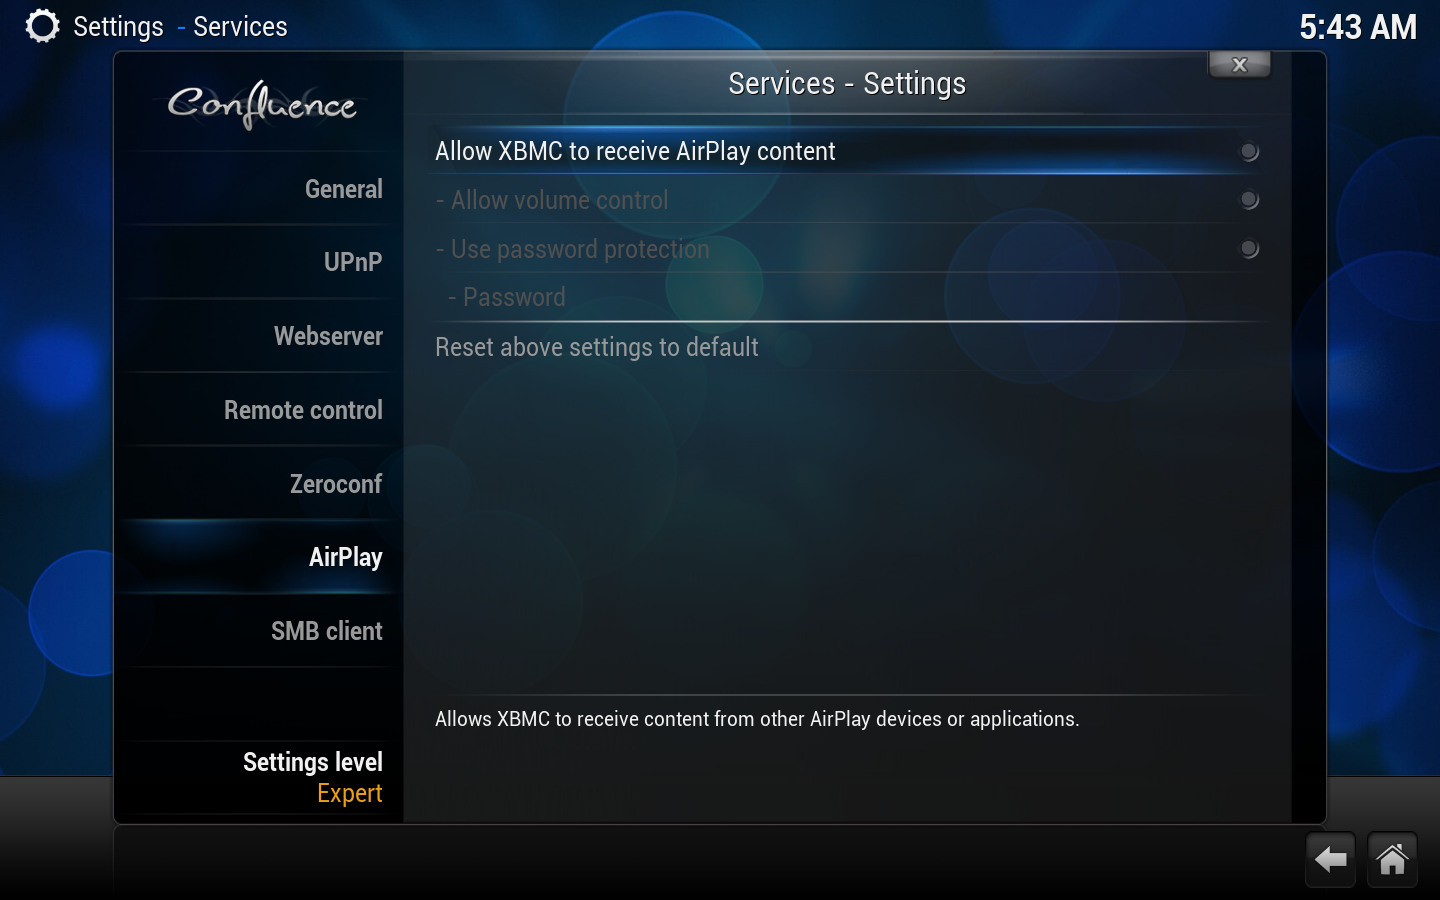 Settings.services.airplay.png